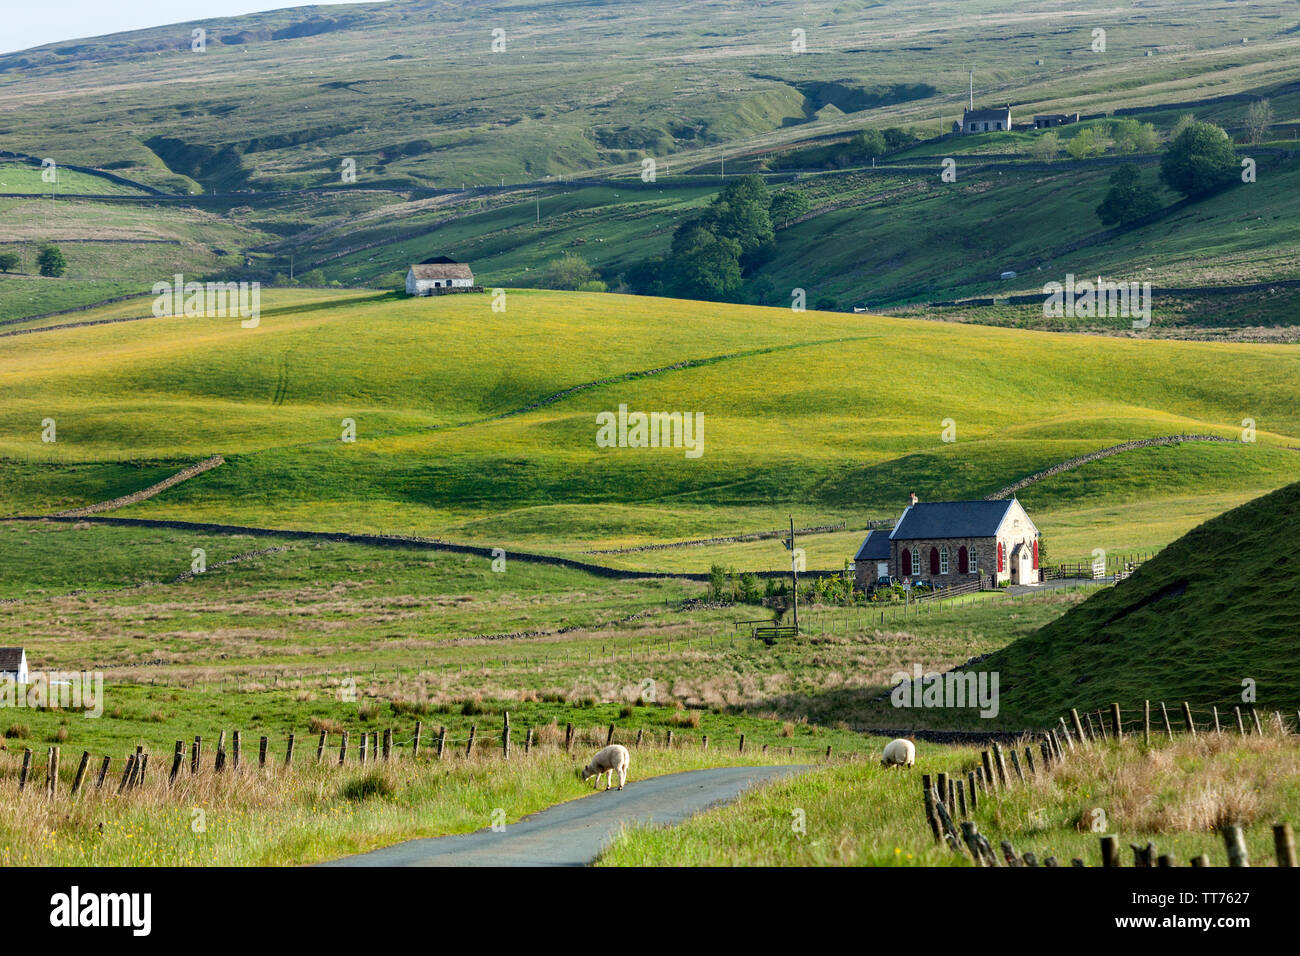 Teesdale, County Durham, UK.  15th June 2019. UK Weather.  After days of heavy rain which caused flooding in many parts of the UK the sun breaks through illuminating the wild flower meadows and gardens for which the North Pennine valley of Upper Teesdale is noted for.  The North Pennines Area of Outstanding Natural Beauty contains 40% of these rare meadows and flowers. Credit: David Forster/Alamy Live News Stock Photo